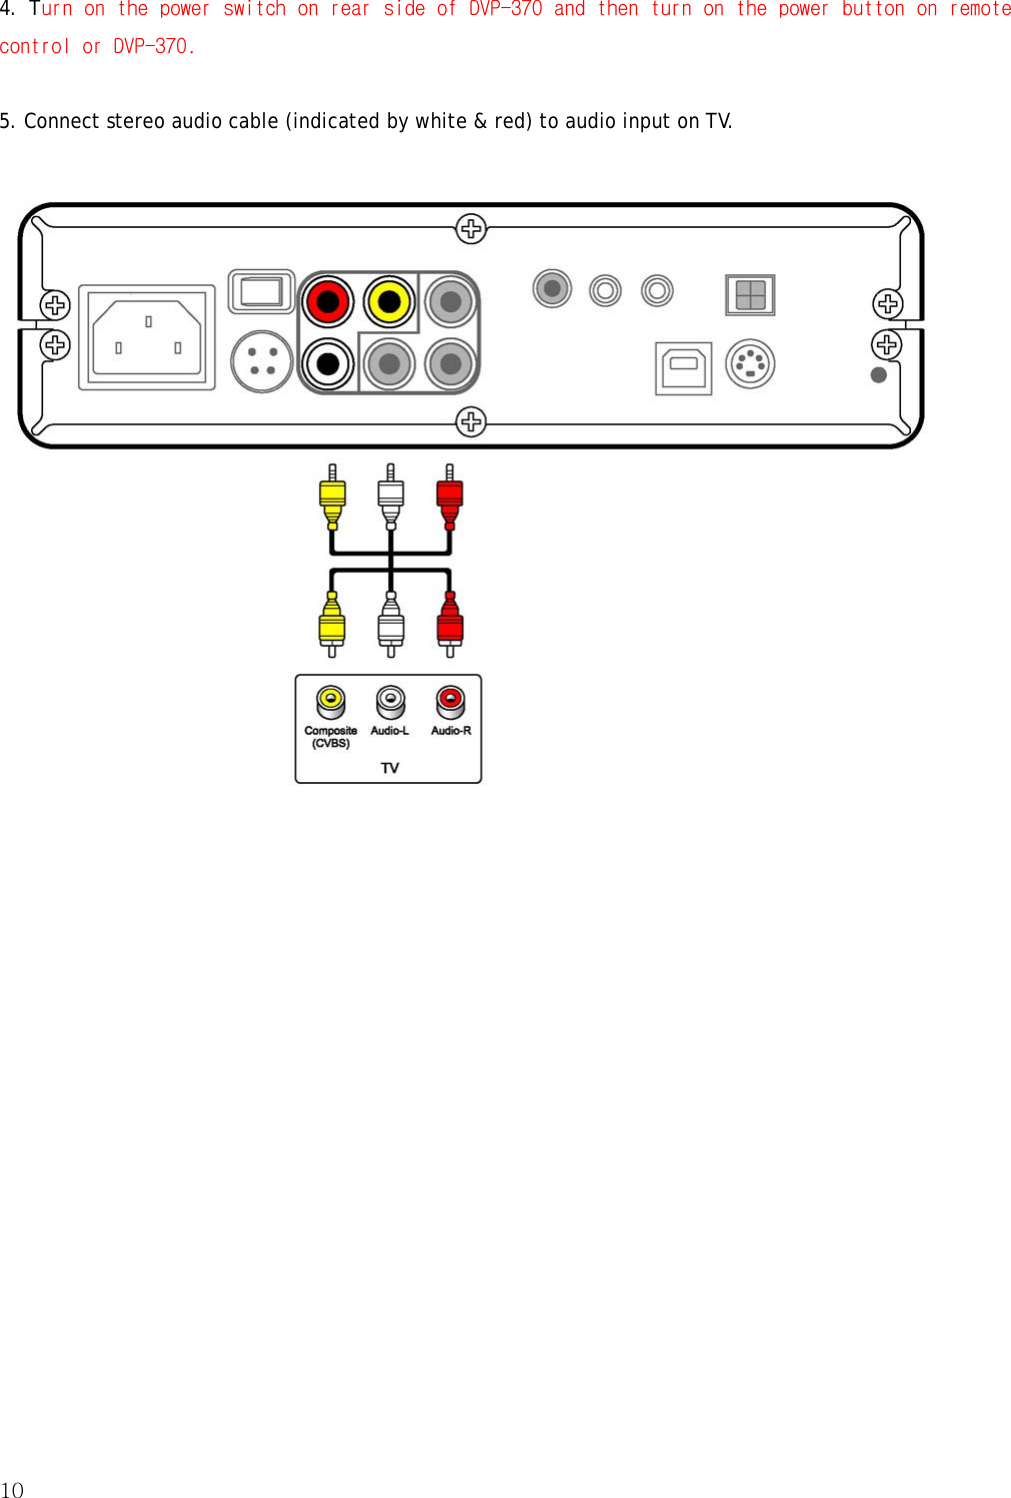 10  4. Turn on the power switch on rear side of DVP-370 and then turn on the power button on remote control or DVP-370.  5. Connect stereo audio cable (indicated by white &amp; red) to audio input on TV.      